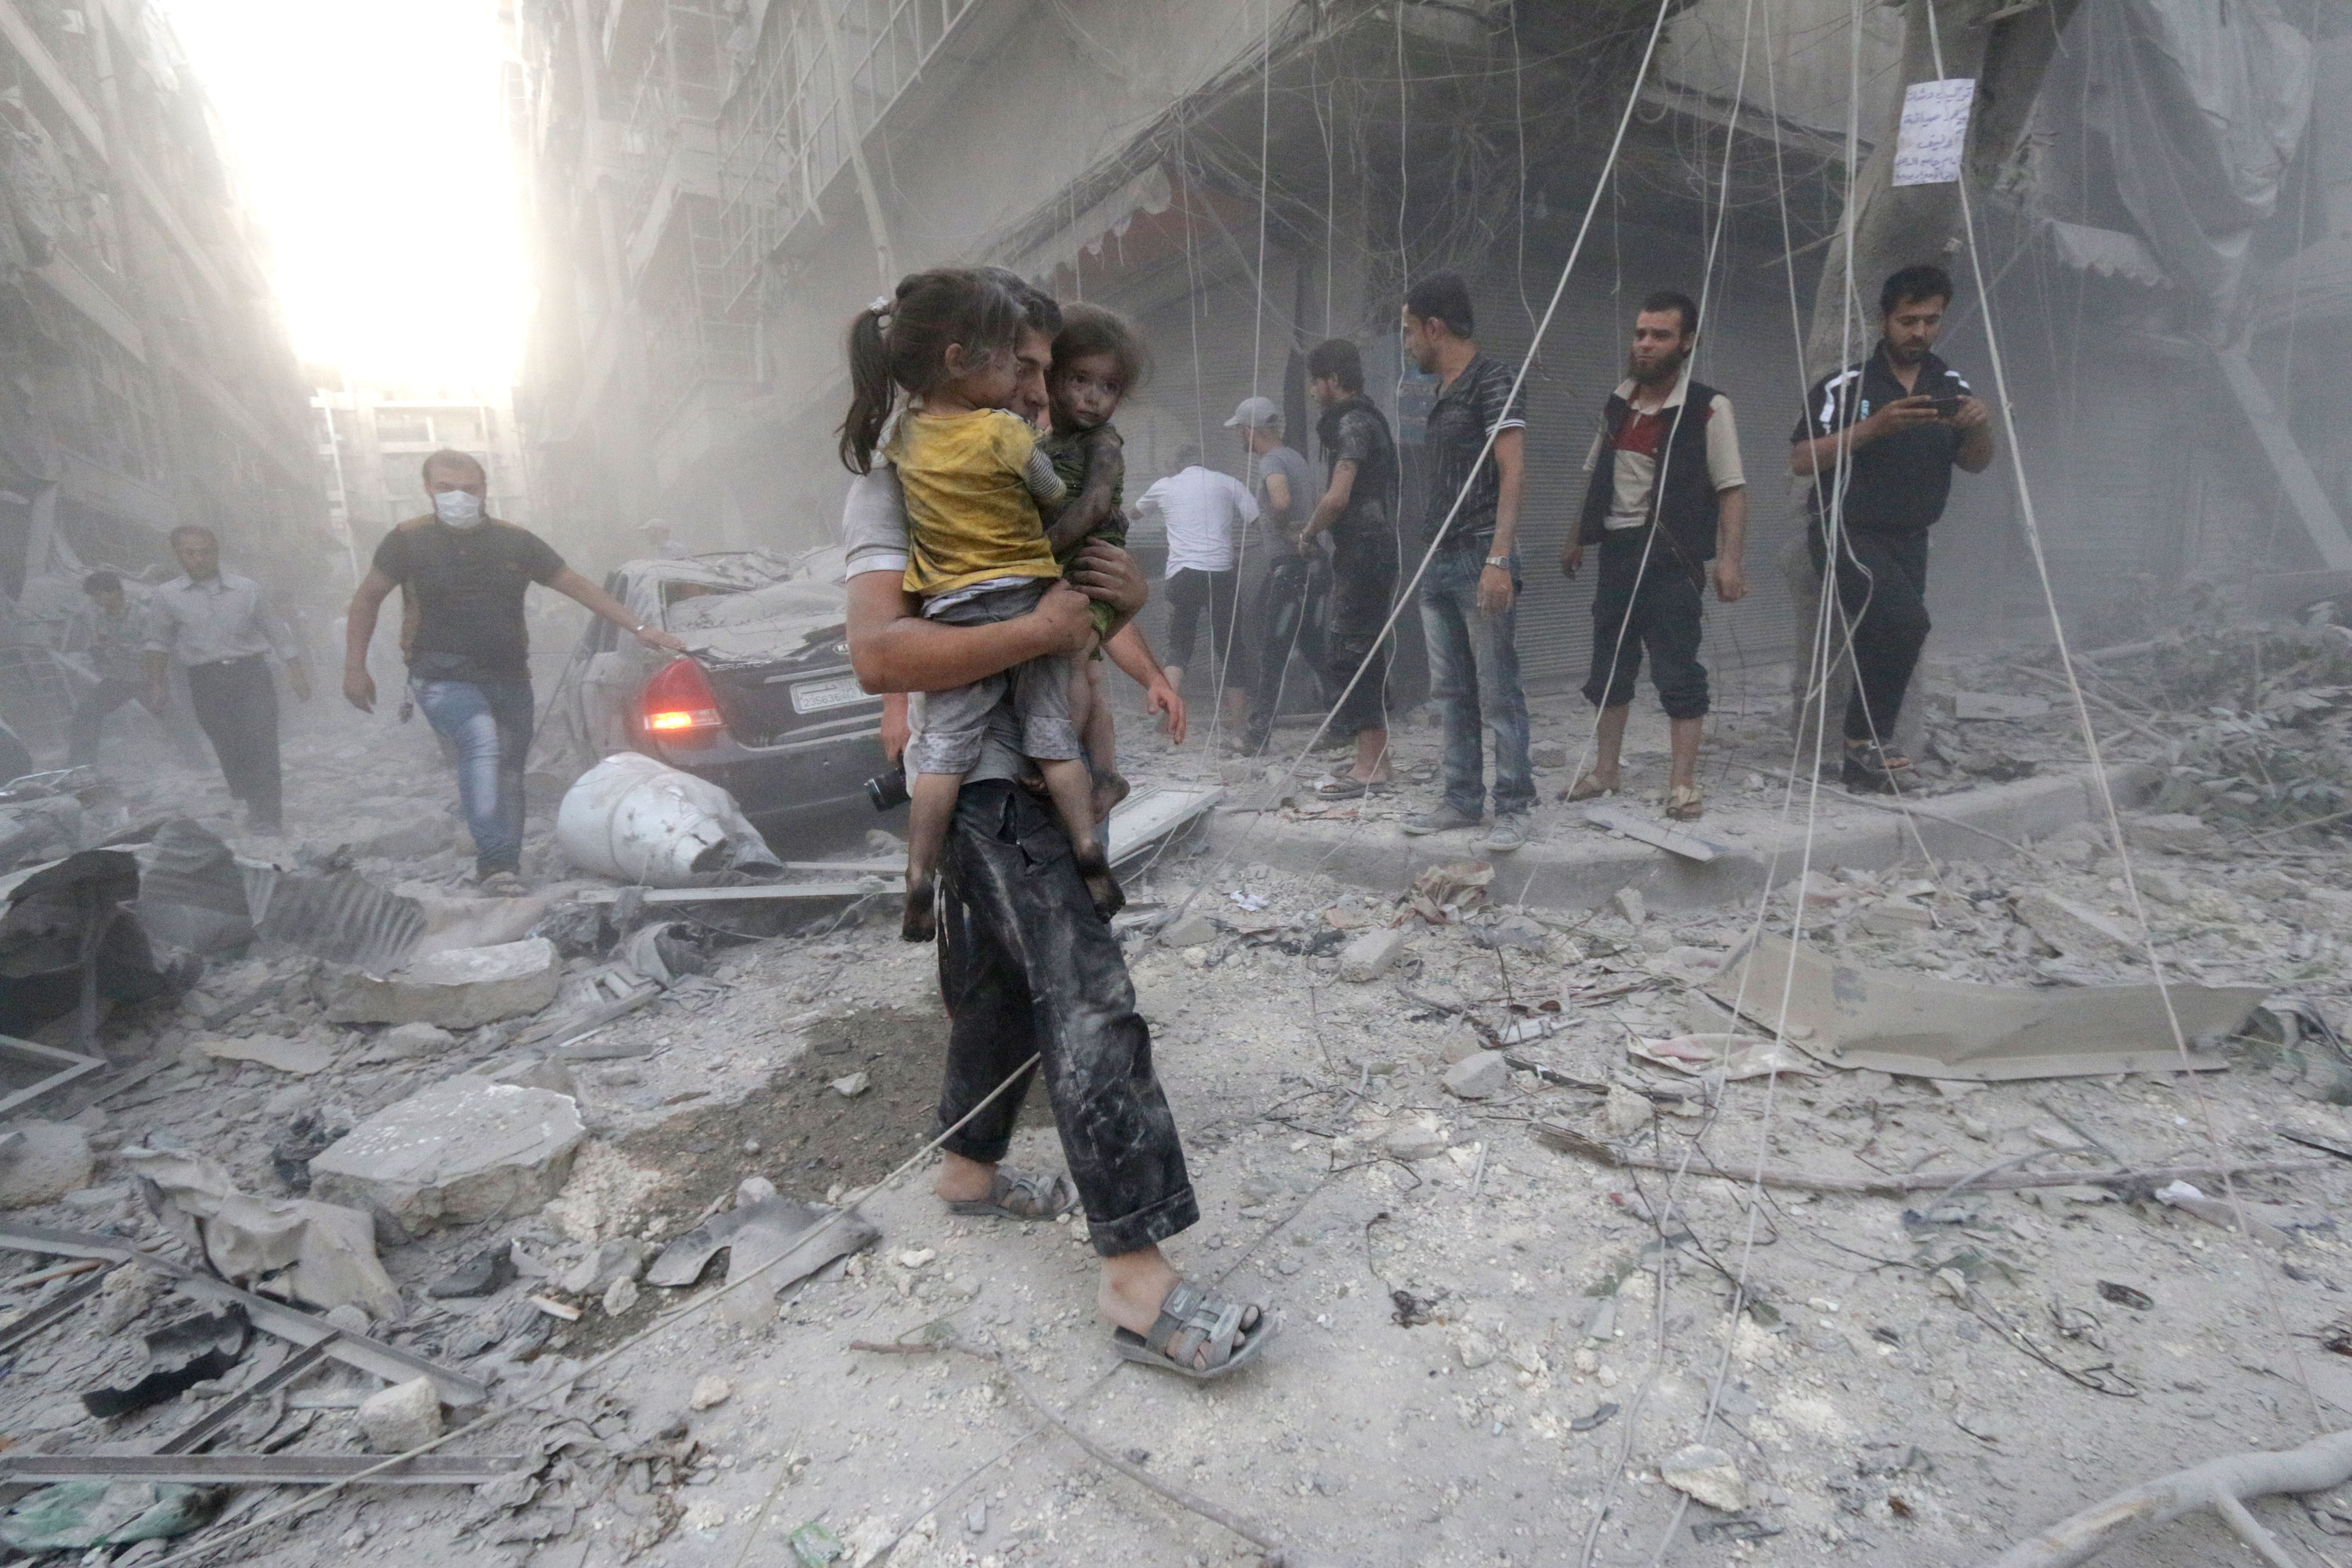 A Syrian man carries two girls covered with dust following a reported air strike by government forces on July 9, 2014 in the northern city of Aleppo. According to the Syrian Observatory for Human Rights, by May some 2,000 civilians including 500 children had been killed in the daily air strikes, which rights groups have condemned as a "war crime" for failing to discriminate between military and civilian targets. AFP PHOTO /AMC/ZEIN AL-RIFAI (Photo credit should read ZEIN AL-RIFAI/AFP/Getty Images)